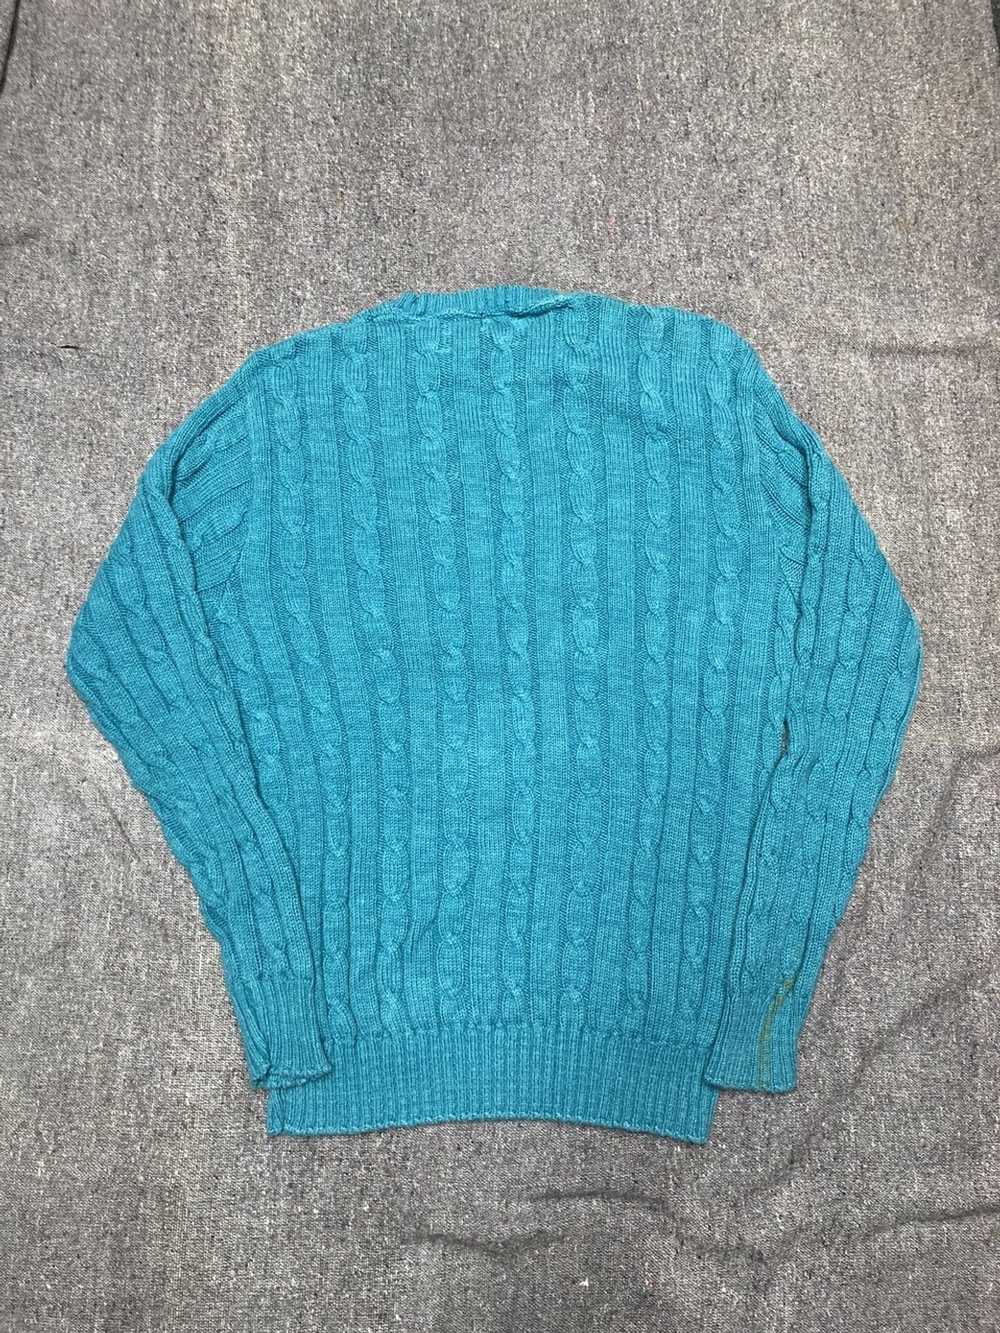 Coloured Cable Knit Sweater × Vintage × Woolrich … - image 7